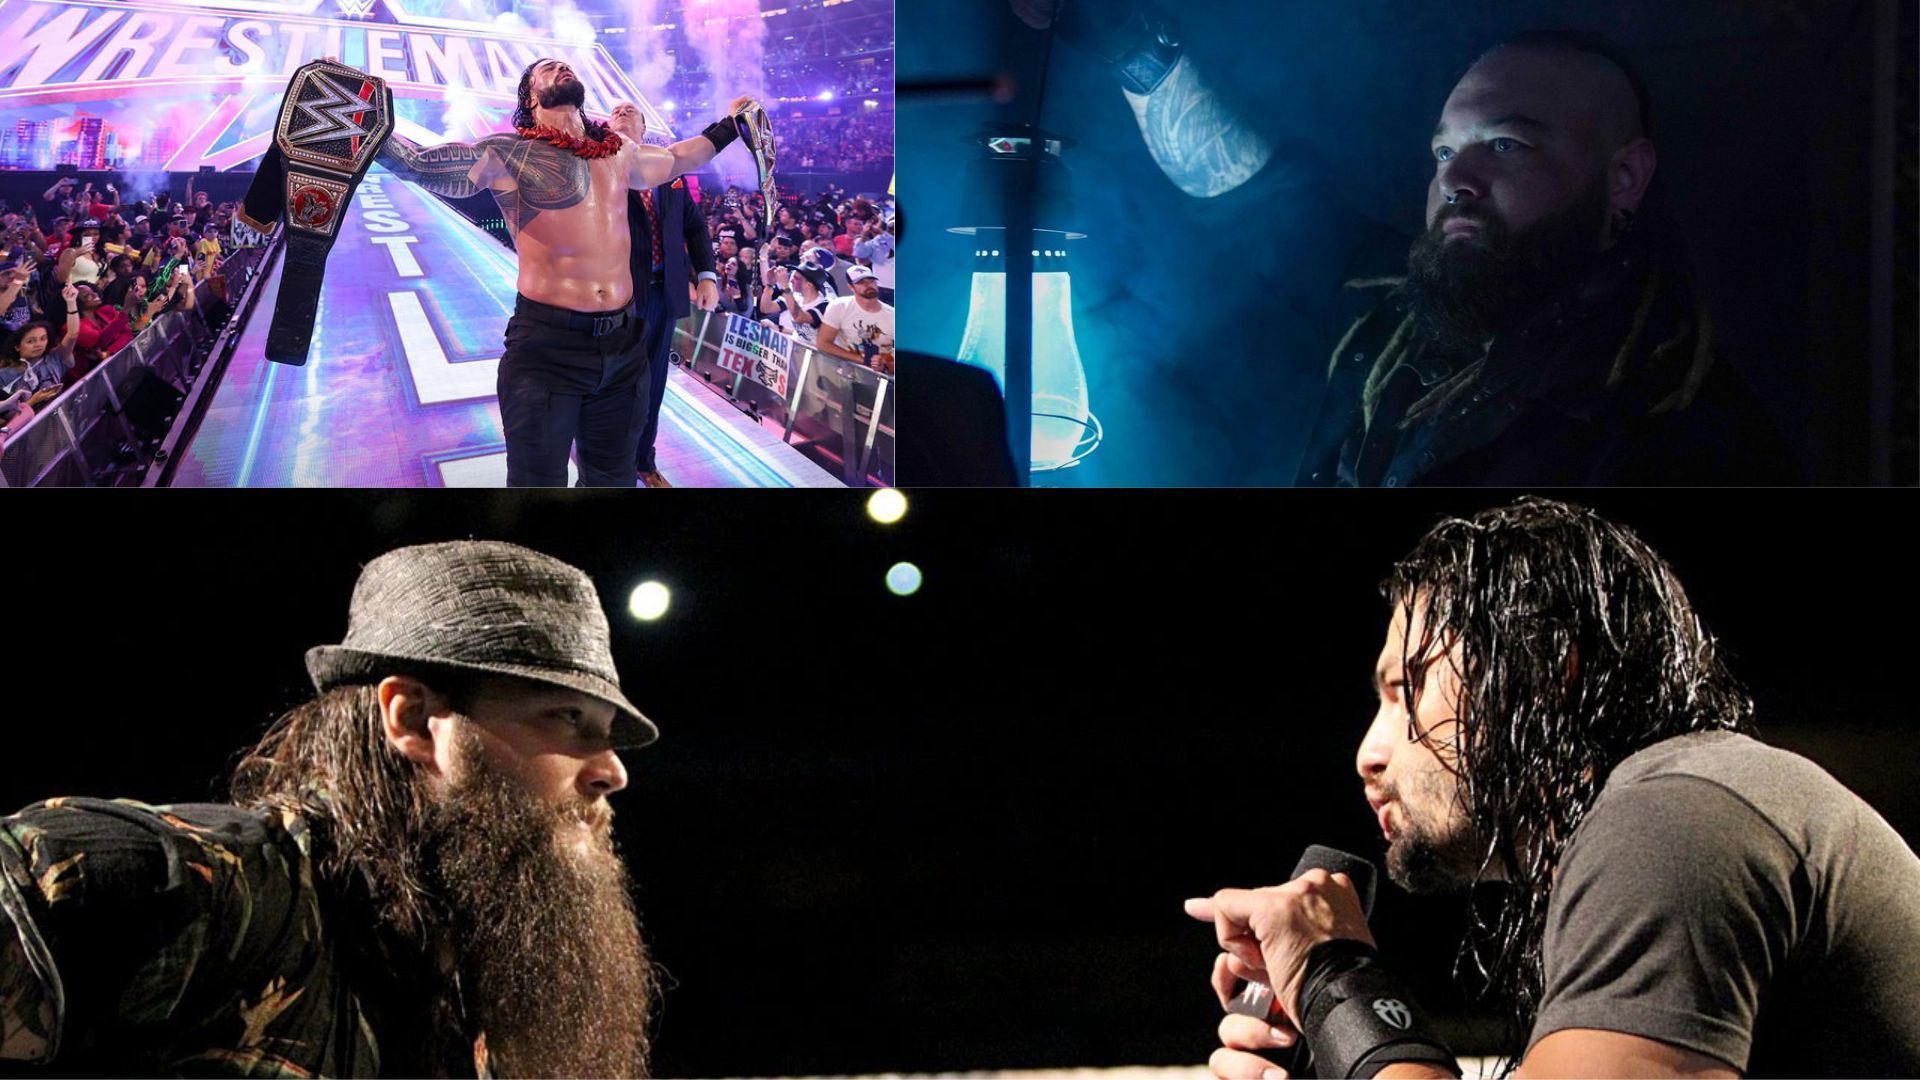 Roman Reigns and Bray Wyatt in 2015 &amp; 2022: Then (below) &amp; Now (above)